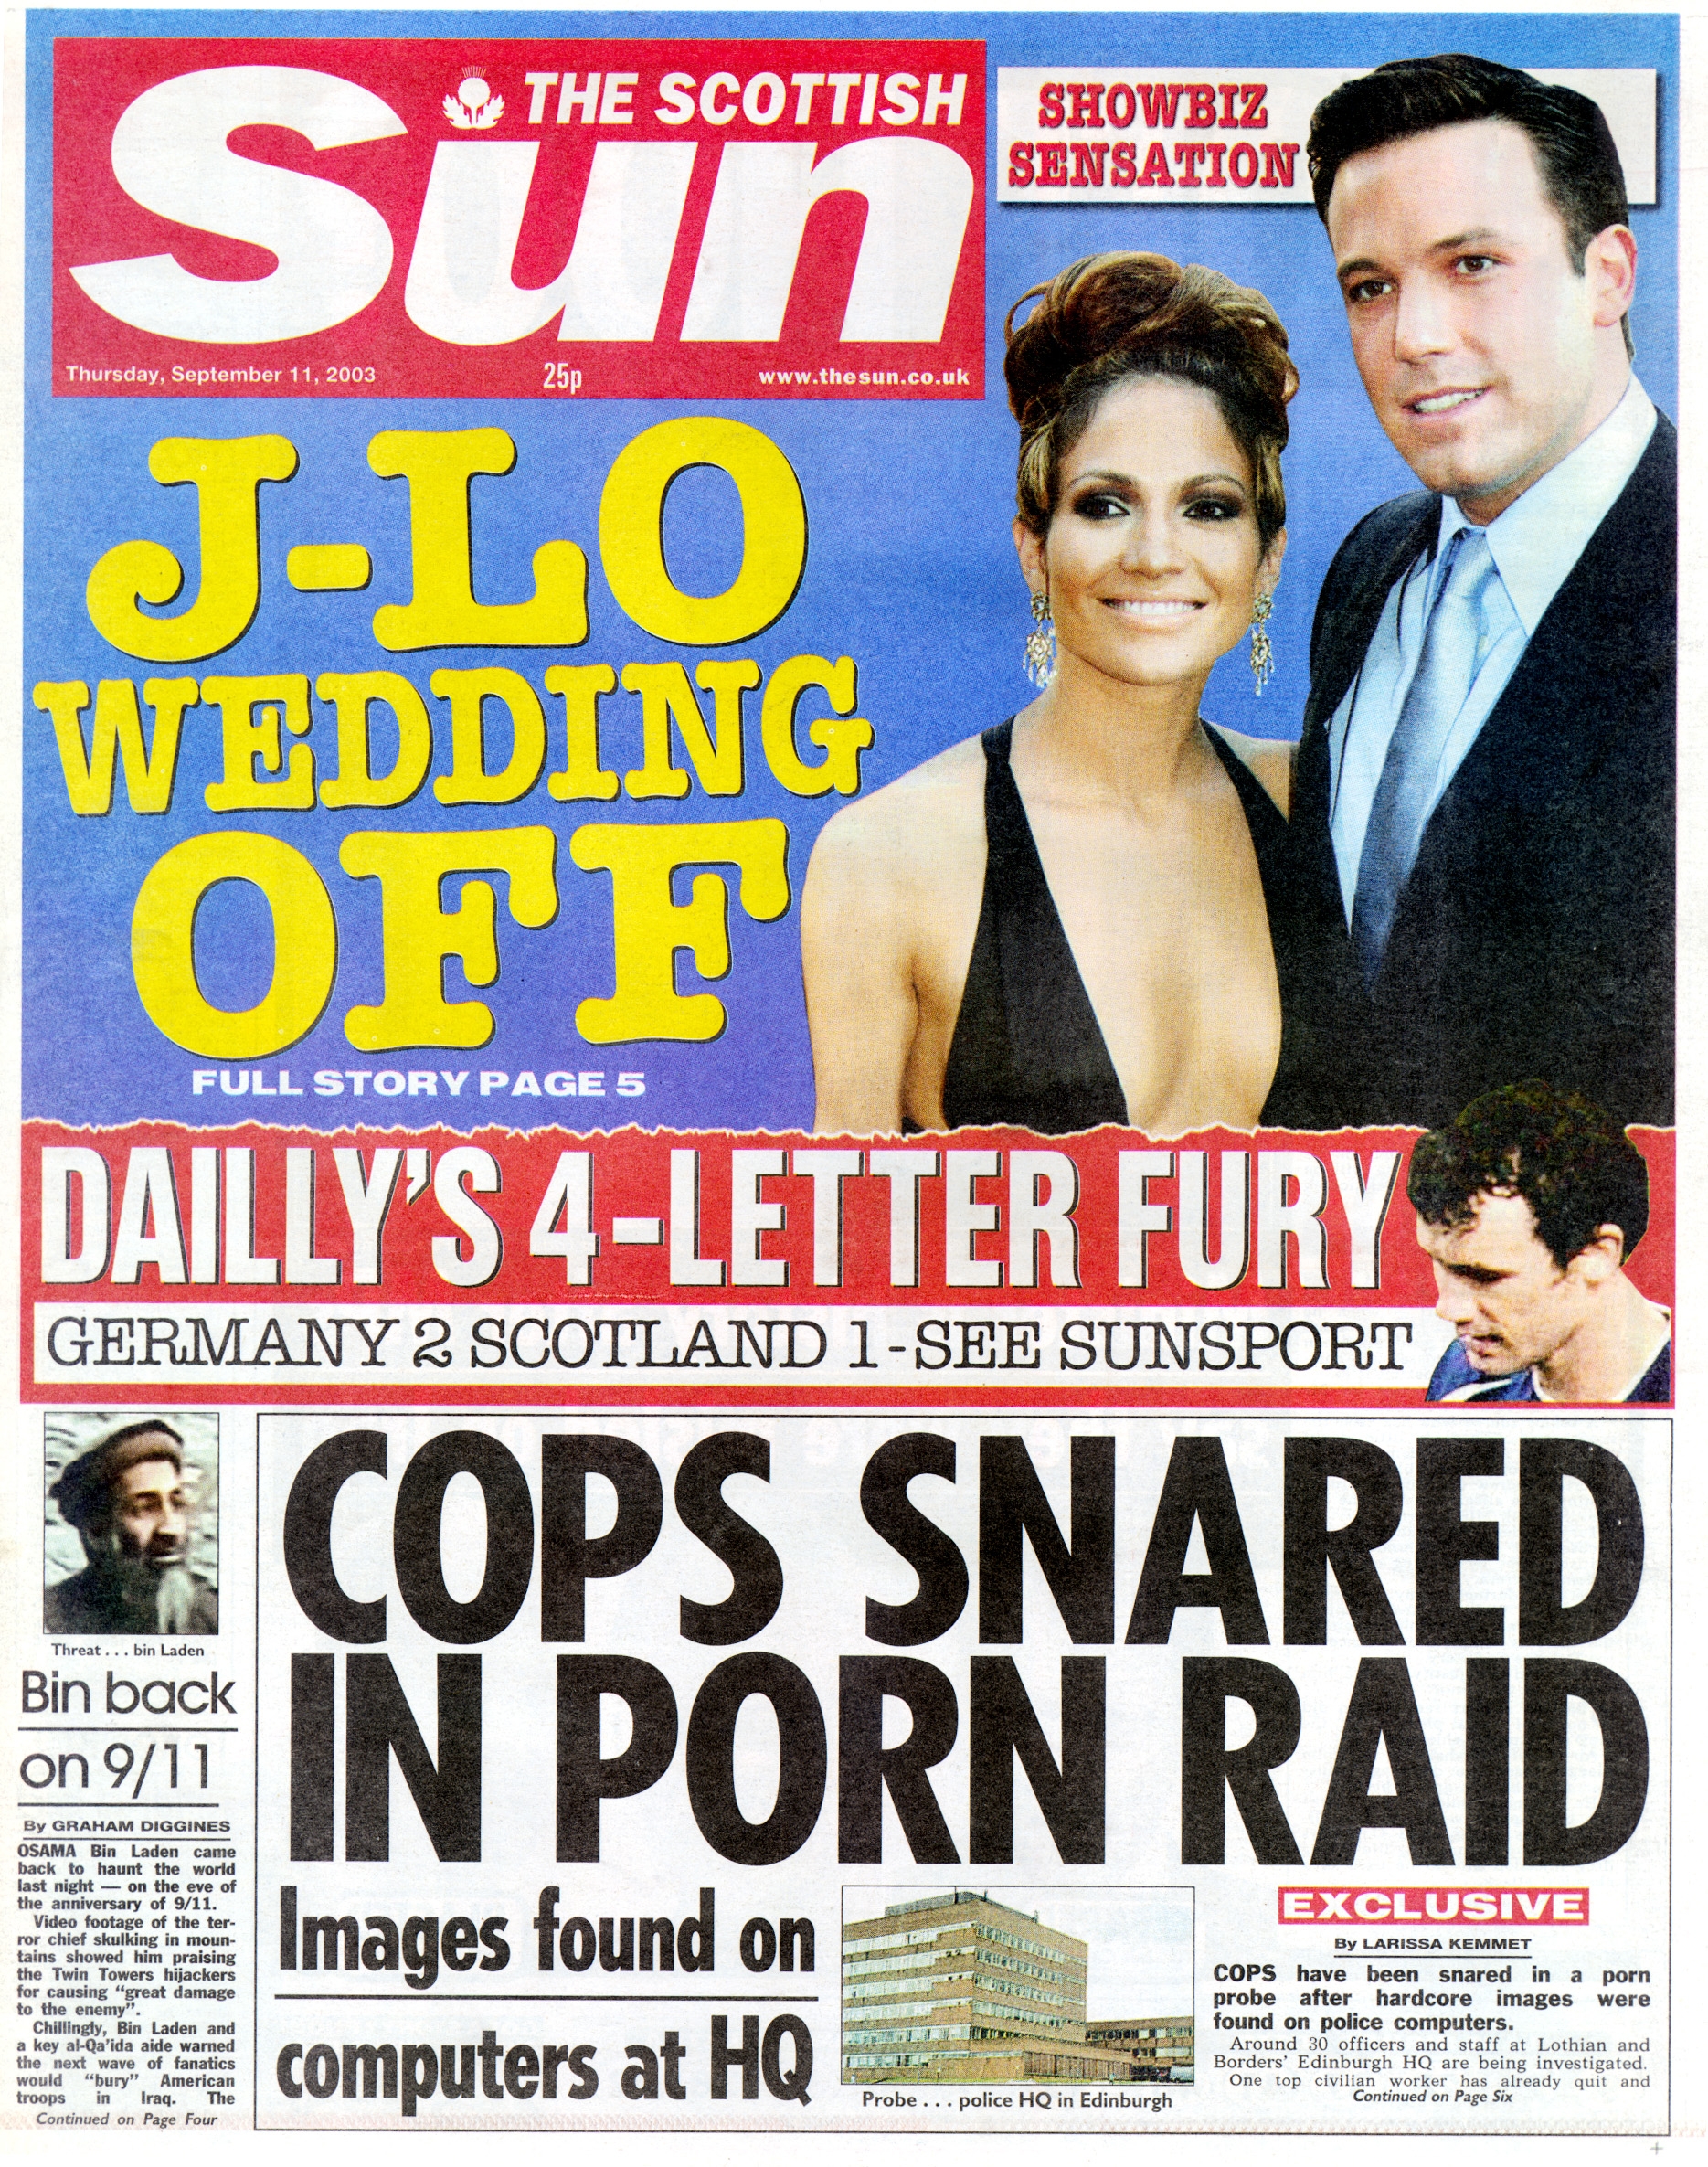 This is not the first time the couple have hit headlines with their relationship troubles - as this front page from 2003 shows